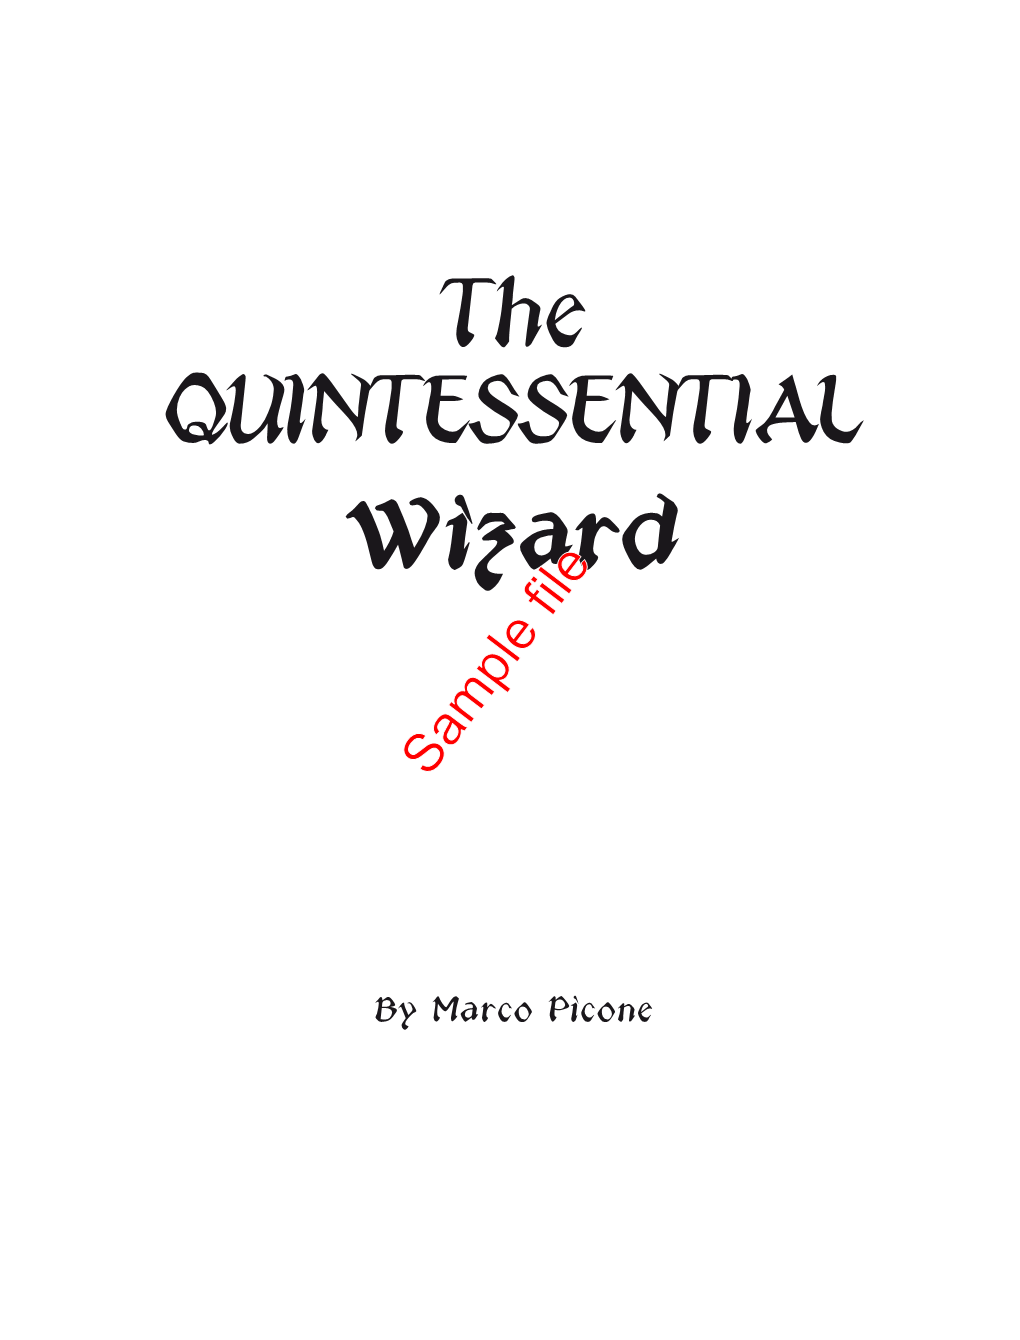 The QUINTESSENTIAL Wizard